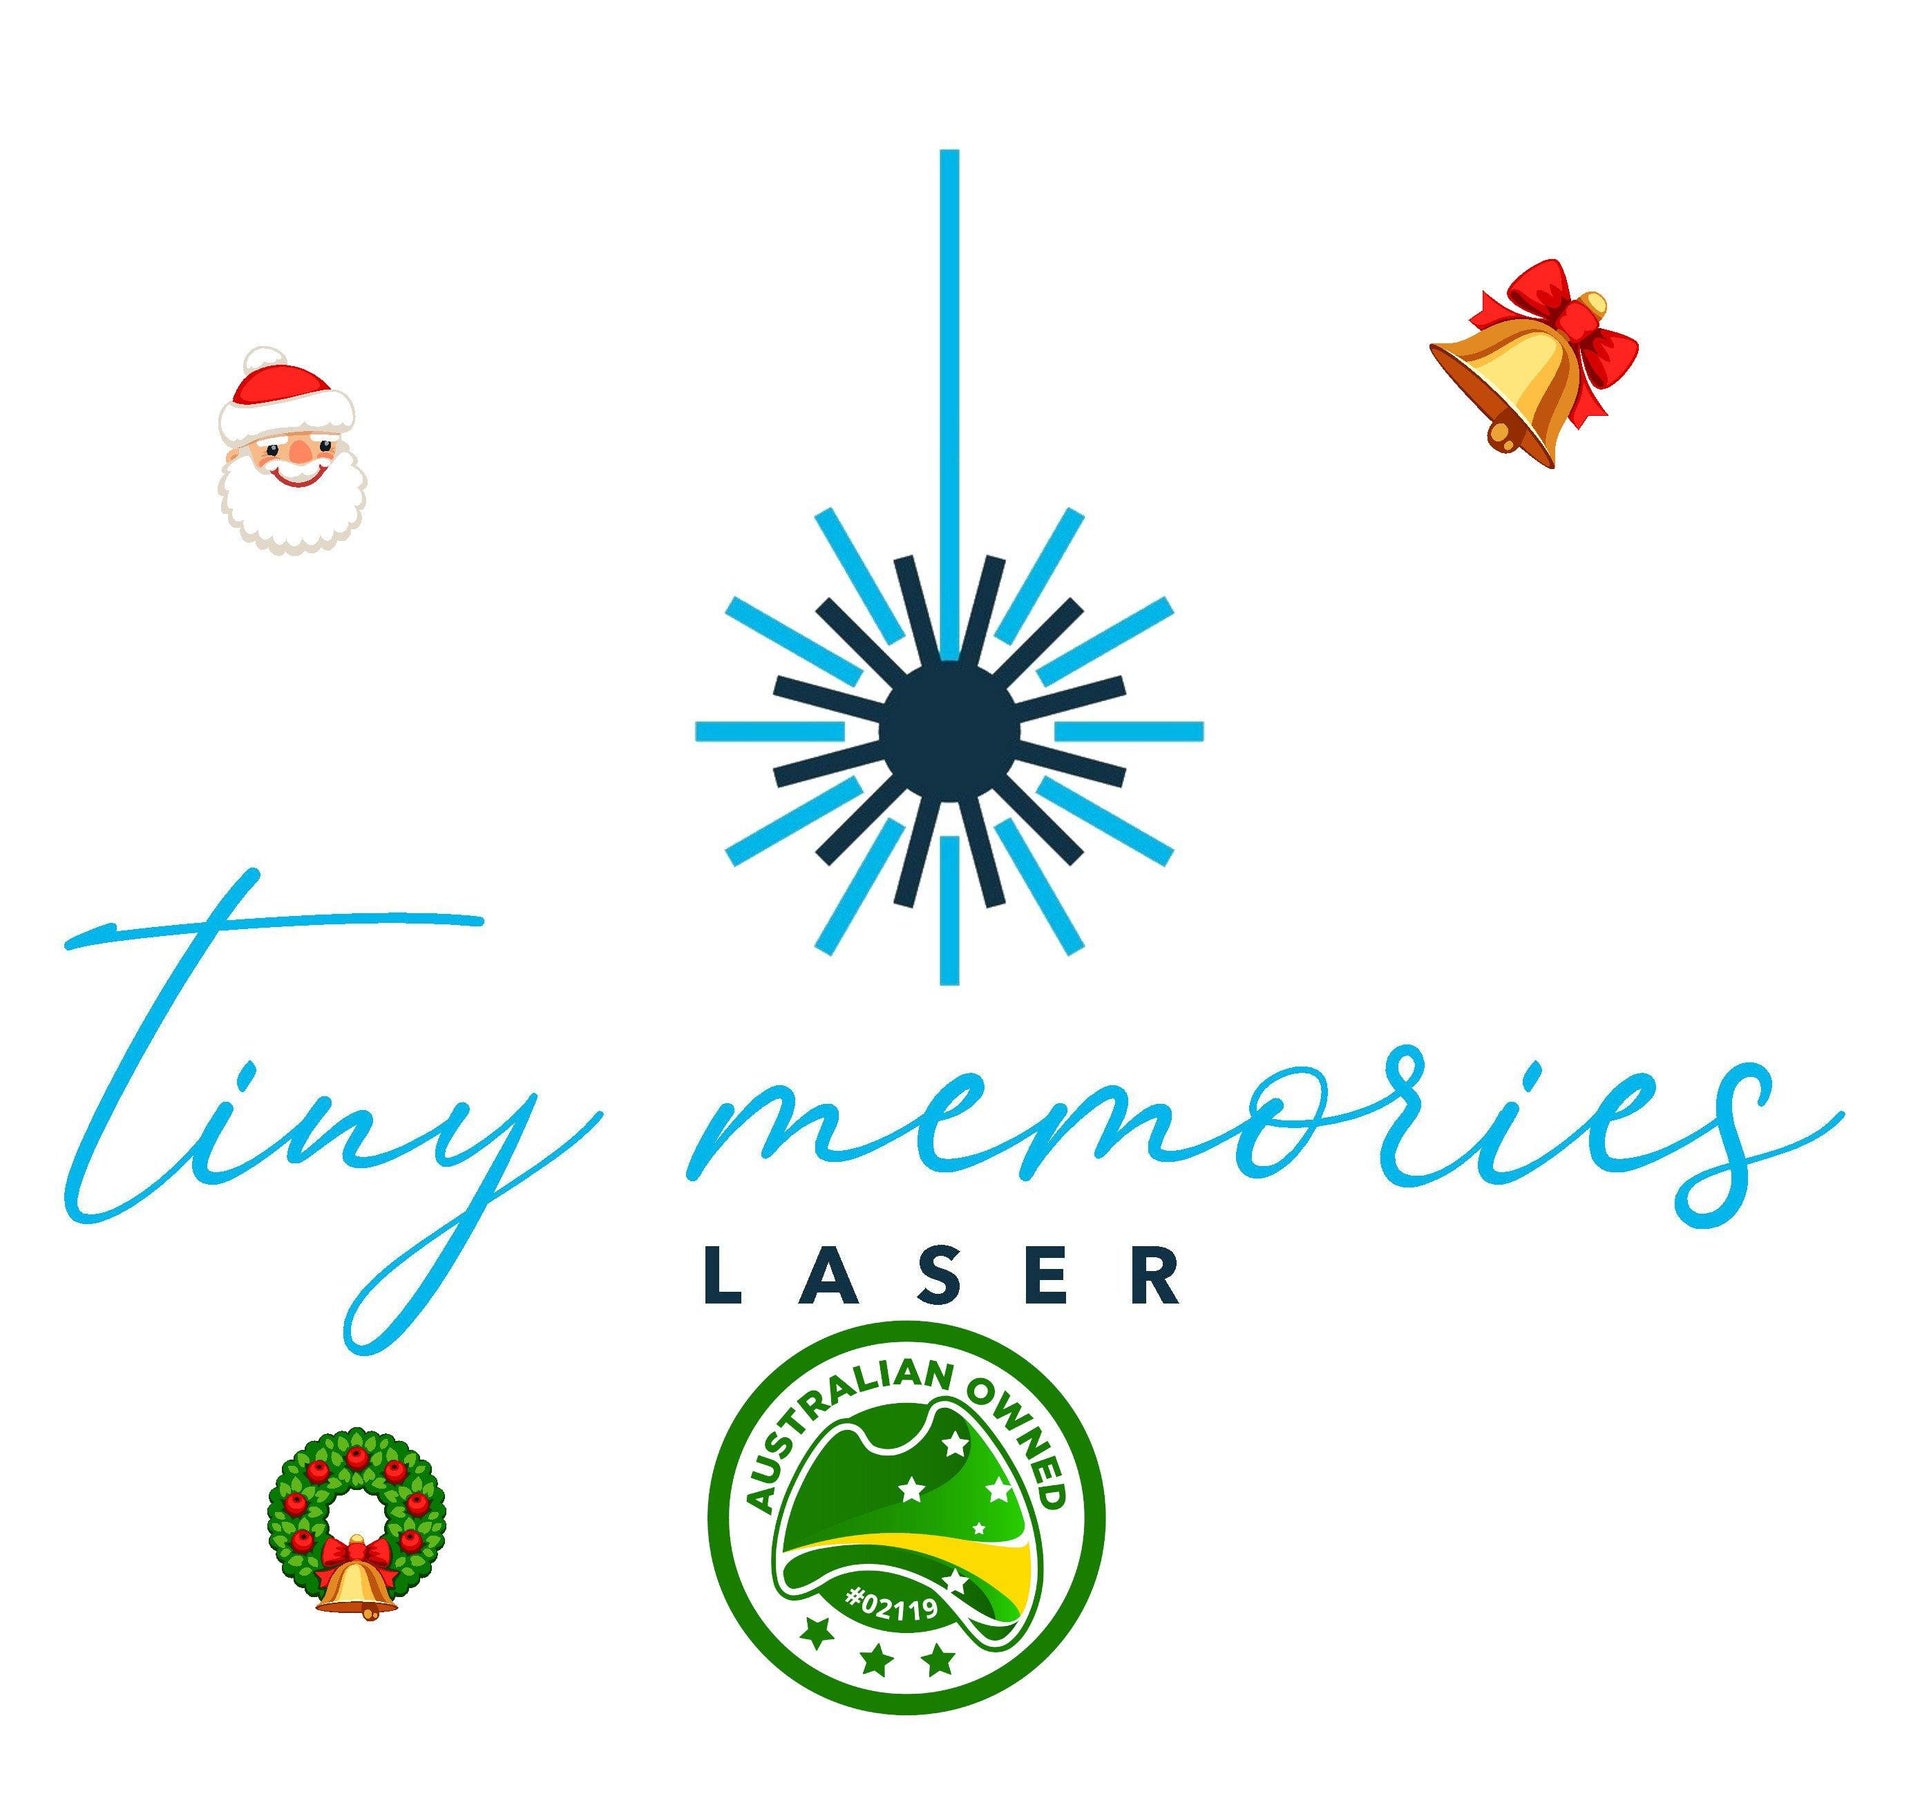 Closing Period from 19/12/2020 to 11/01/2021 - Tiny Memories Laser